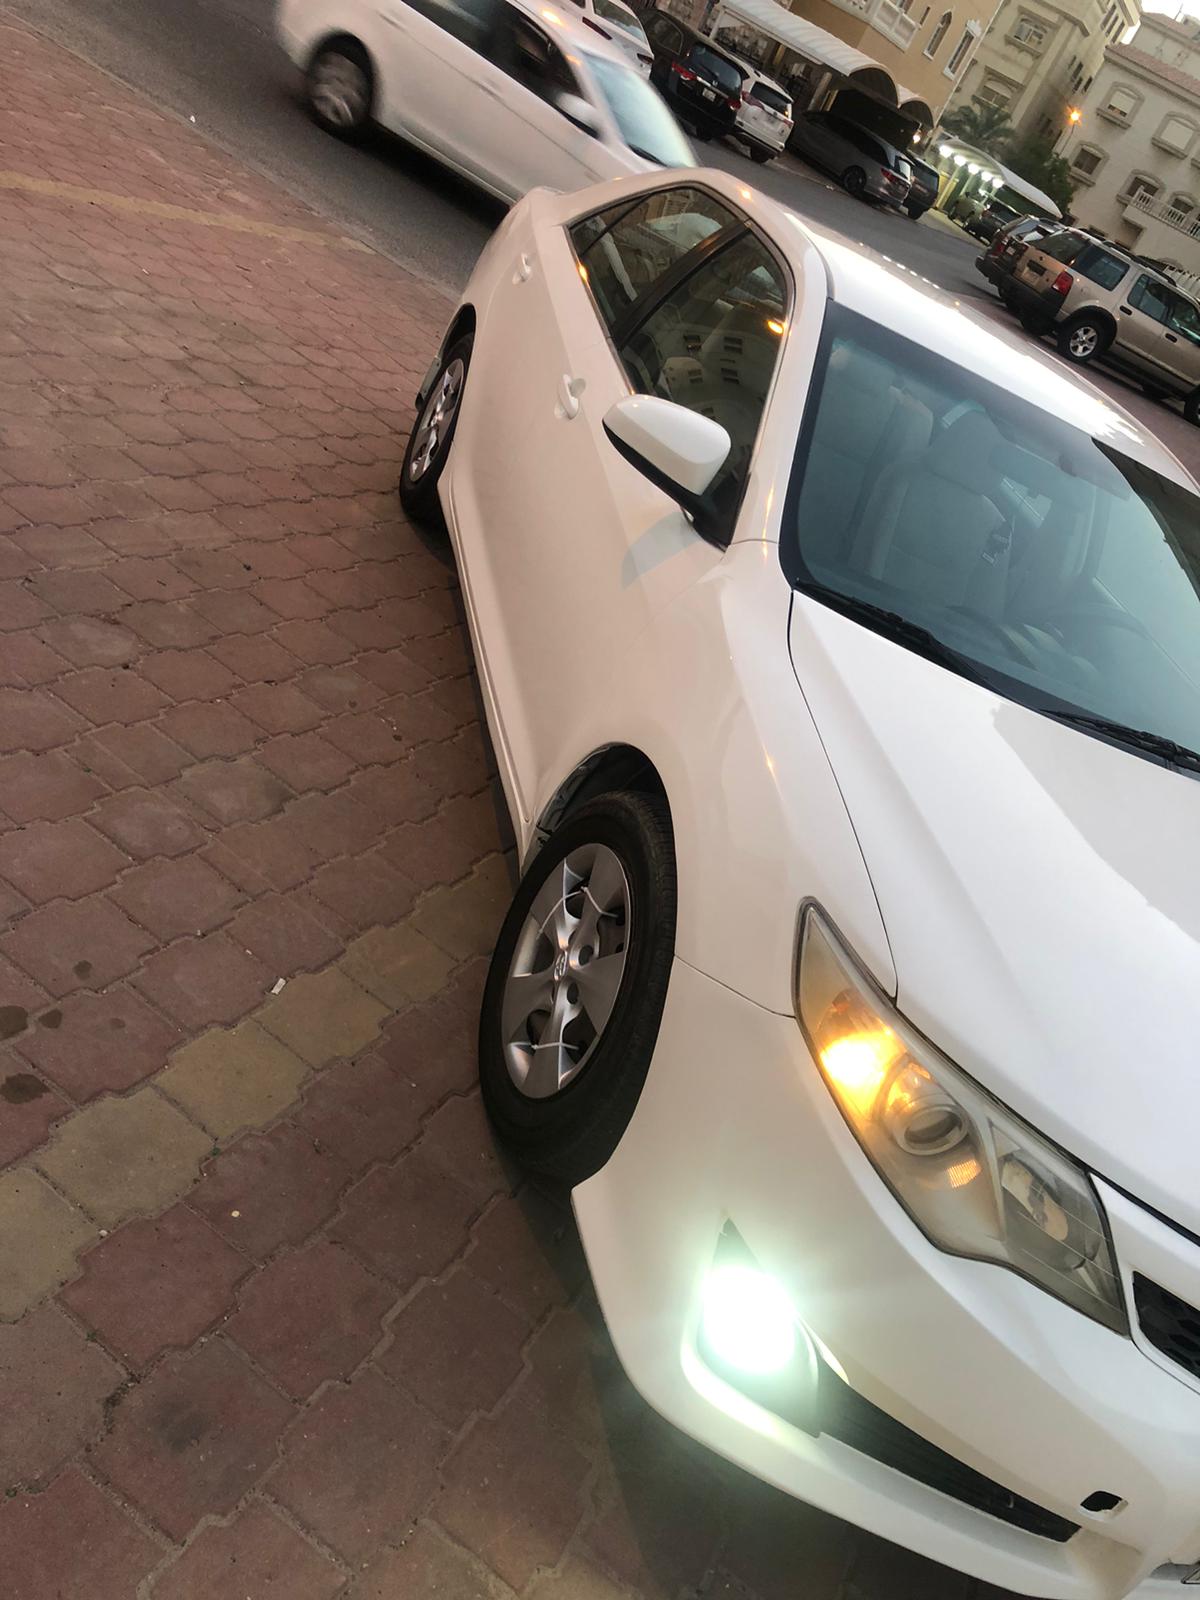 Toyota Camry 2014 200000km in mint Condition 